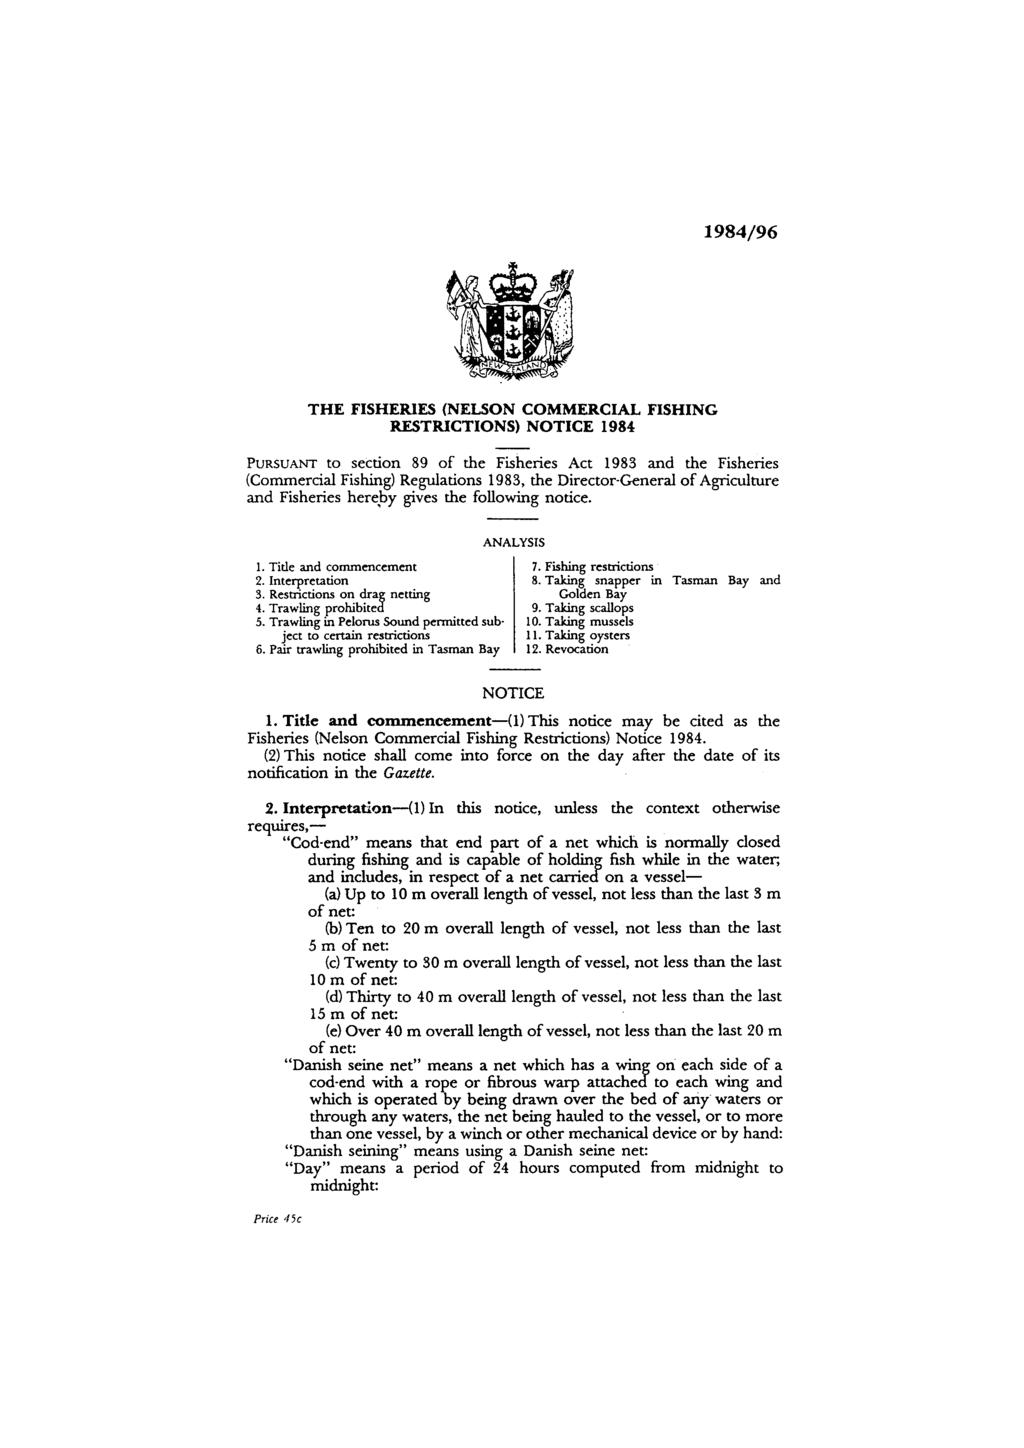 THE FISHERIES (NELSON COMMERCIAL FISHING RESTRICTIONS) NOTICE 1984 PURSUANT to section 89 of the Fisheries Act 1983 and the Fisheries (Commercial Fishing) Regulations 1983, the Director-General